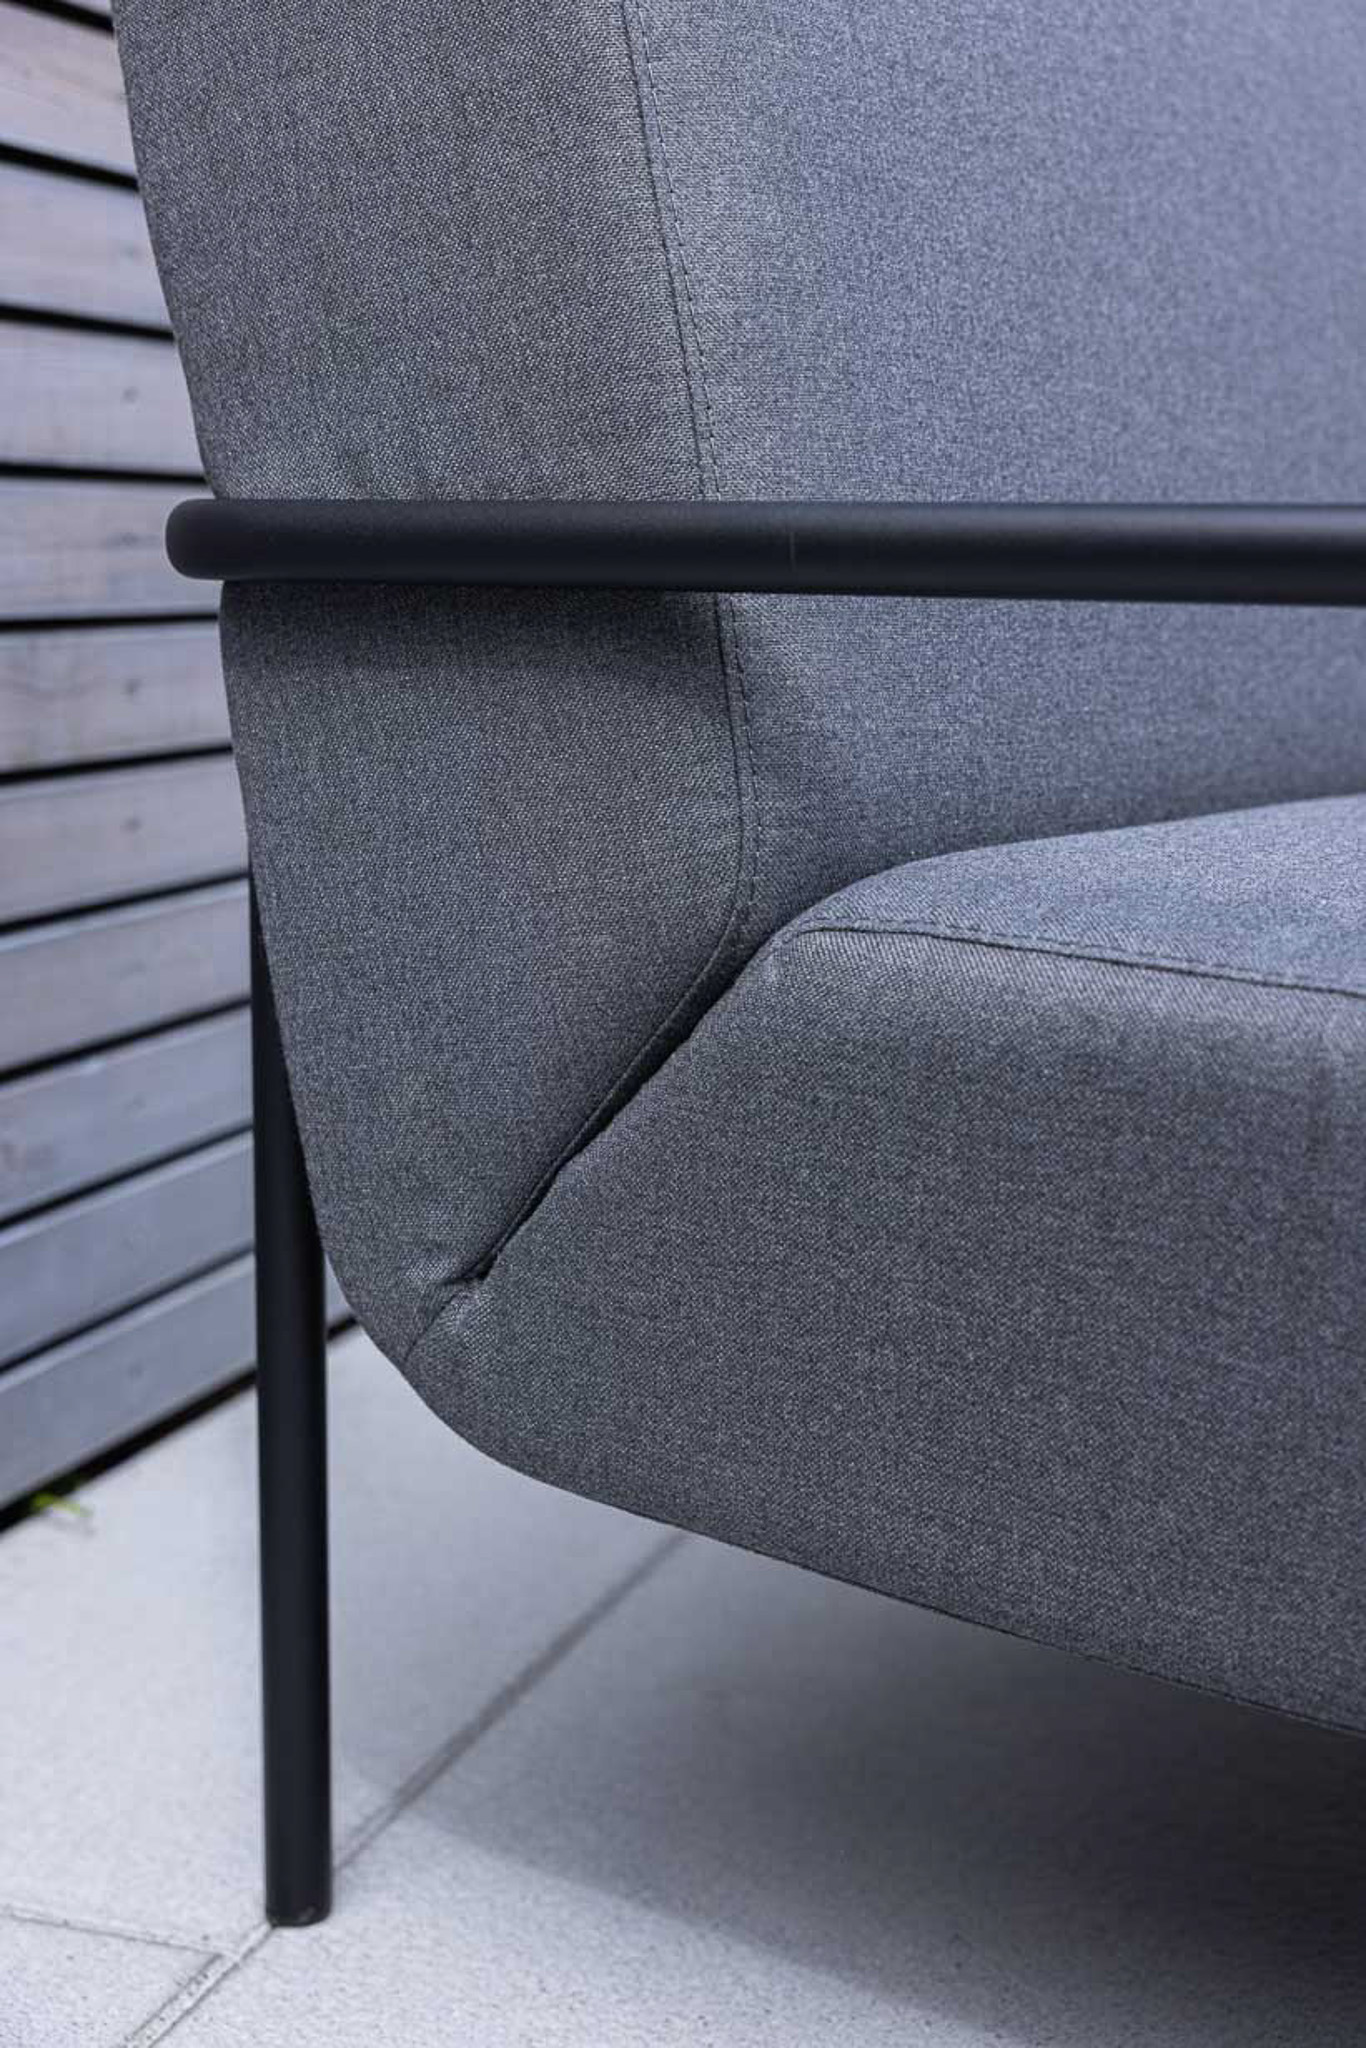 METALLBUDE // SOLEA - OUTDOOR LOUNGE CHAIR | BLACK - ANTHRACITE CUSHION